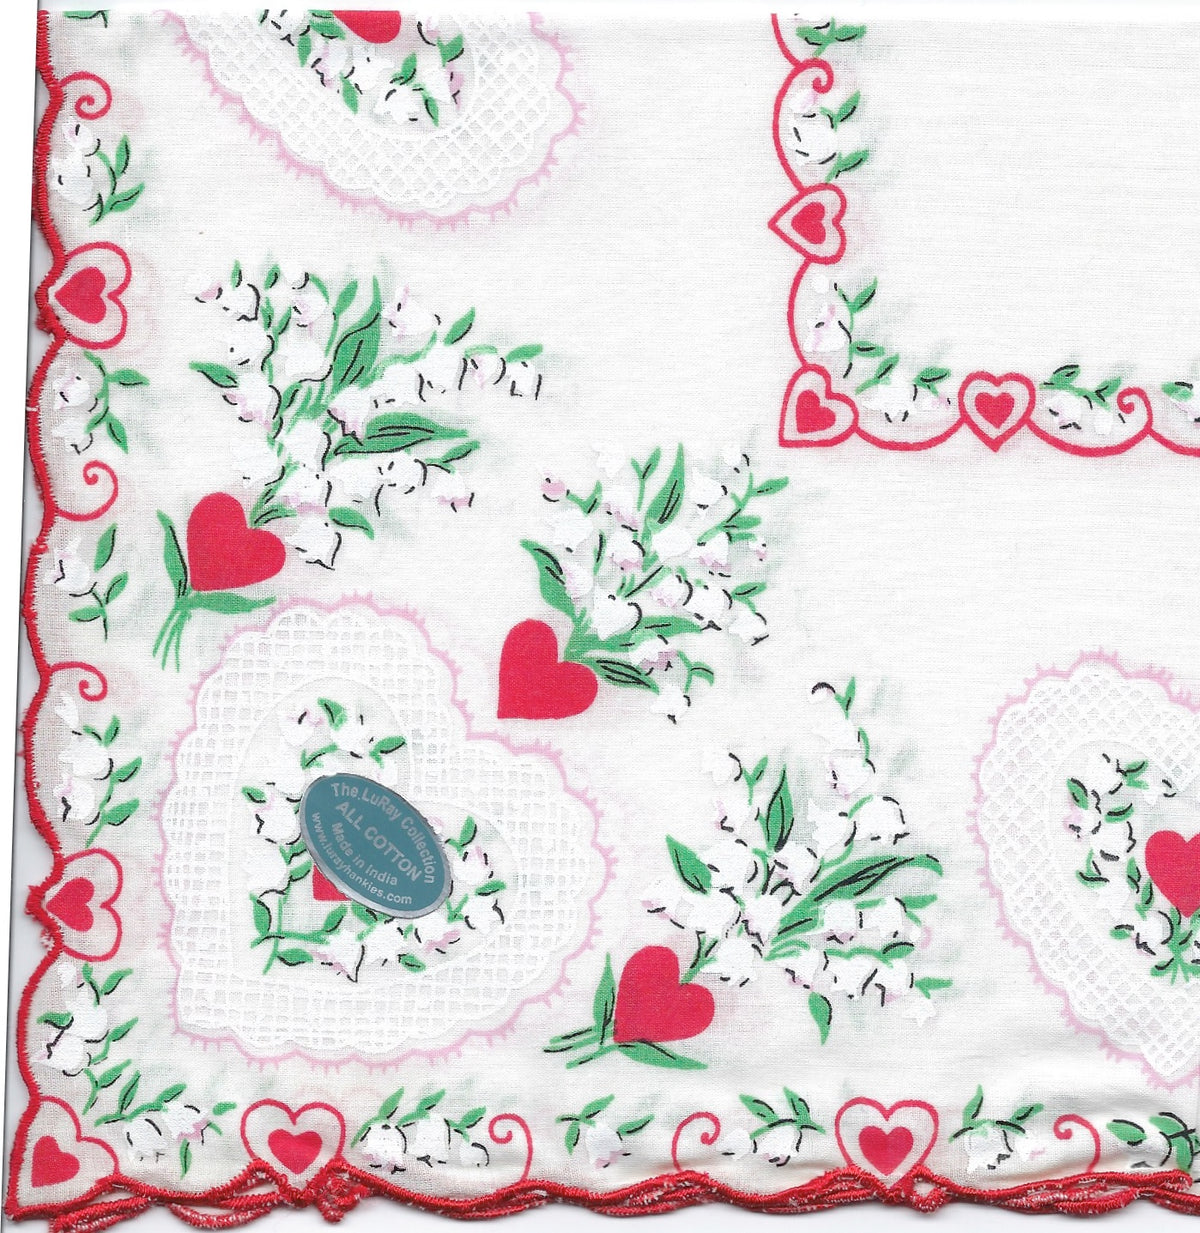 A close-up of a Vintage-Inspired Hanky - Lacey Heart Corner with Lily of the Valley napkin from Hankies ala Carte, crafted with a romantic floral and heart design featuring delicate green vines, red hearts, and white lace patterns, with a "true love" sticker in.